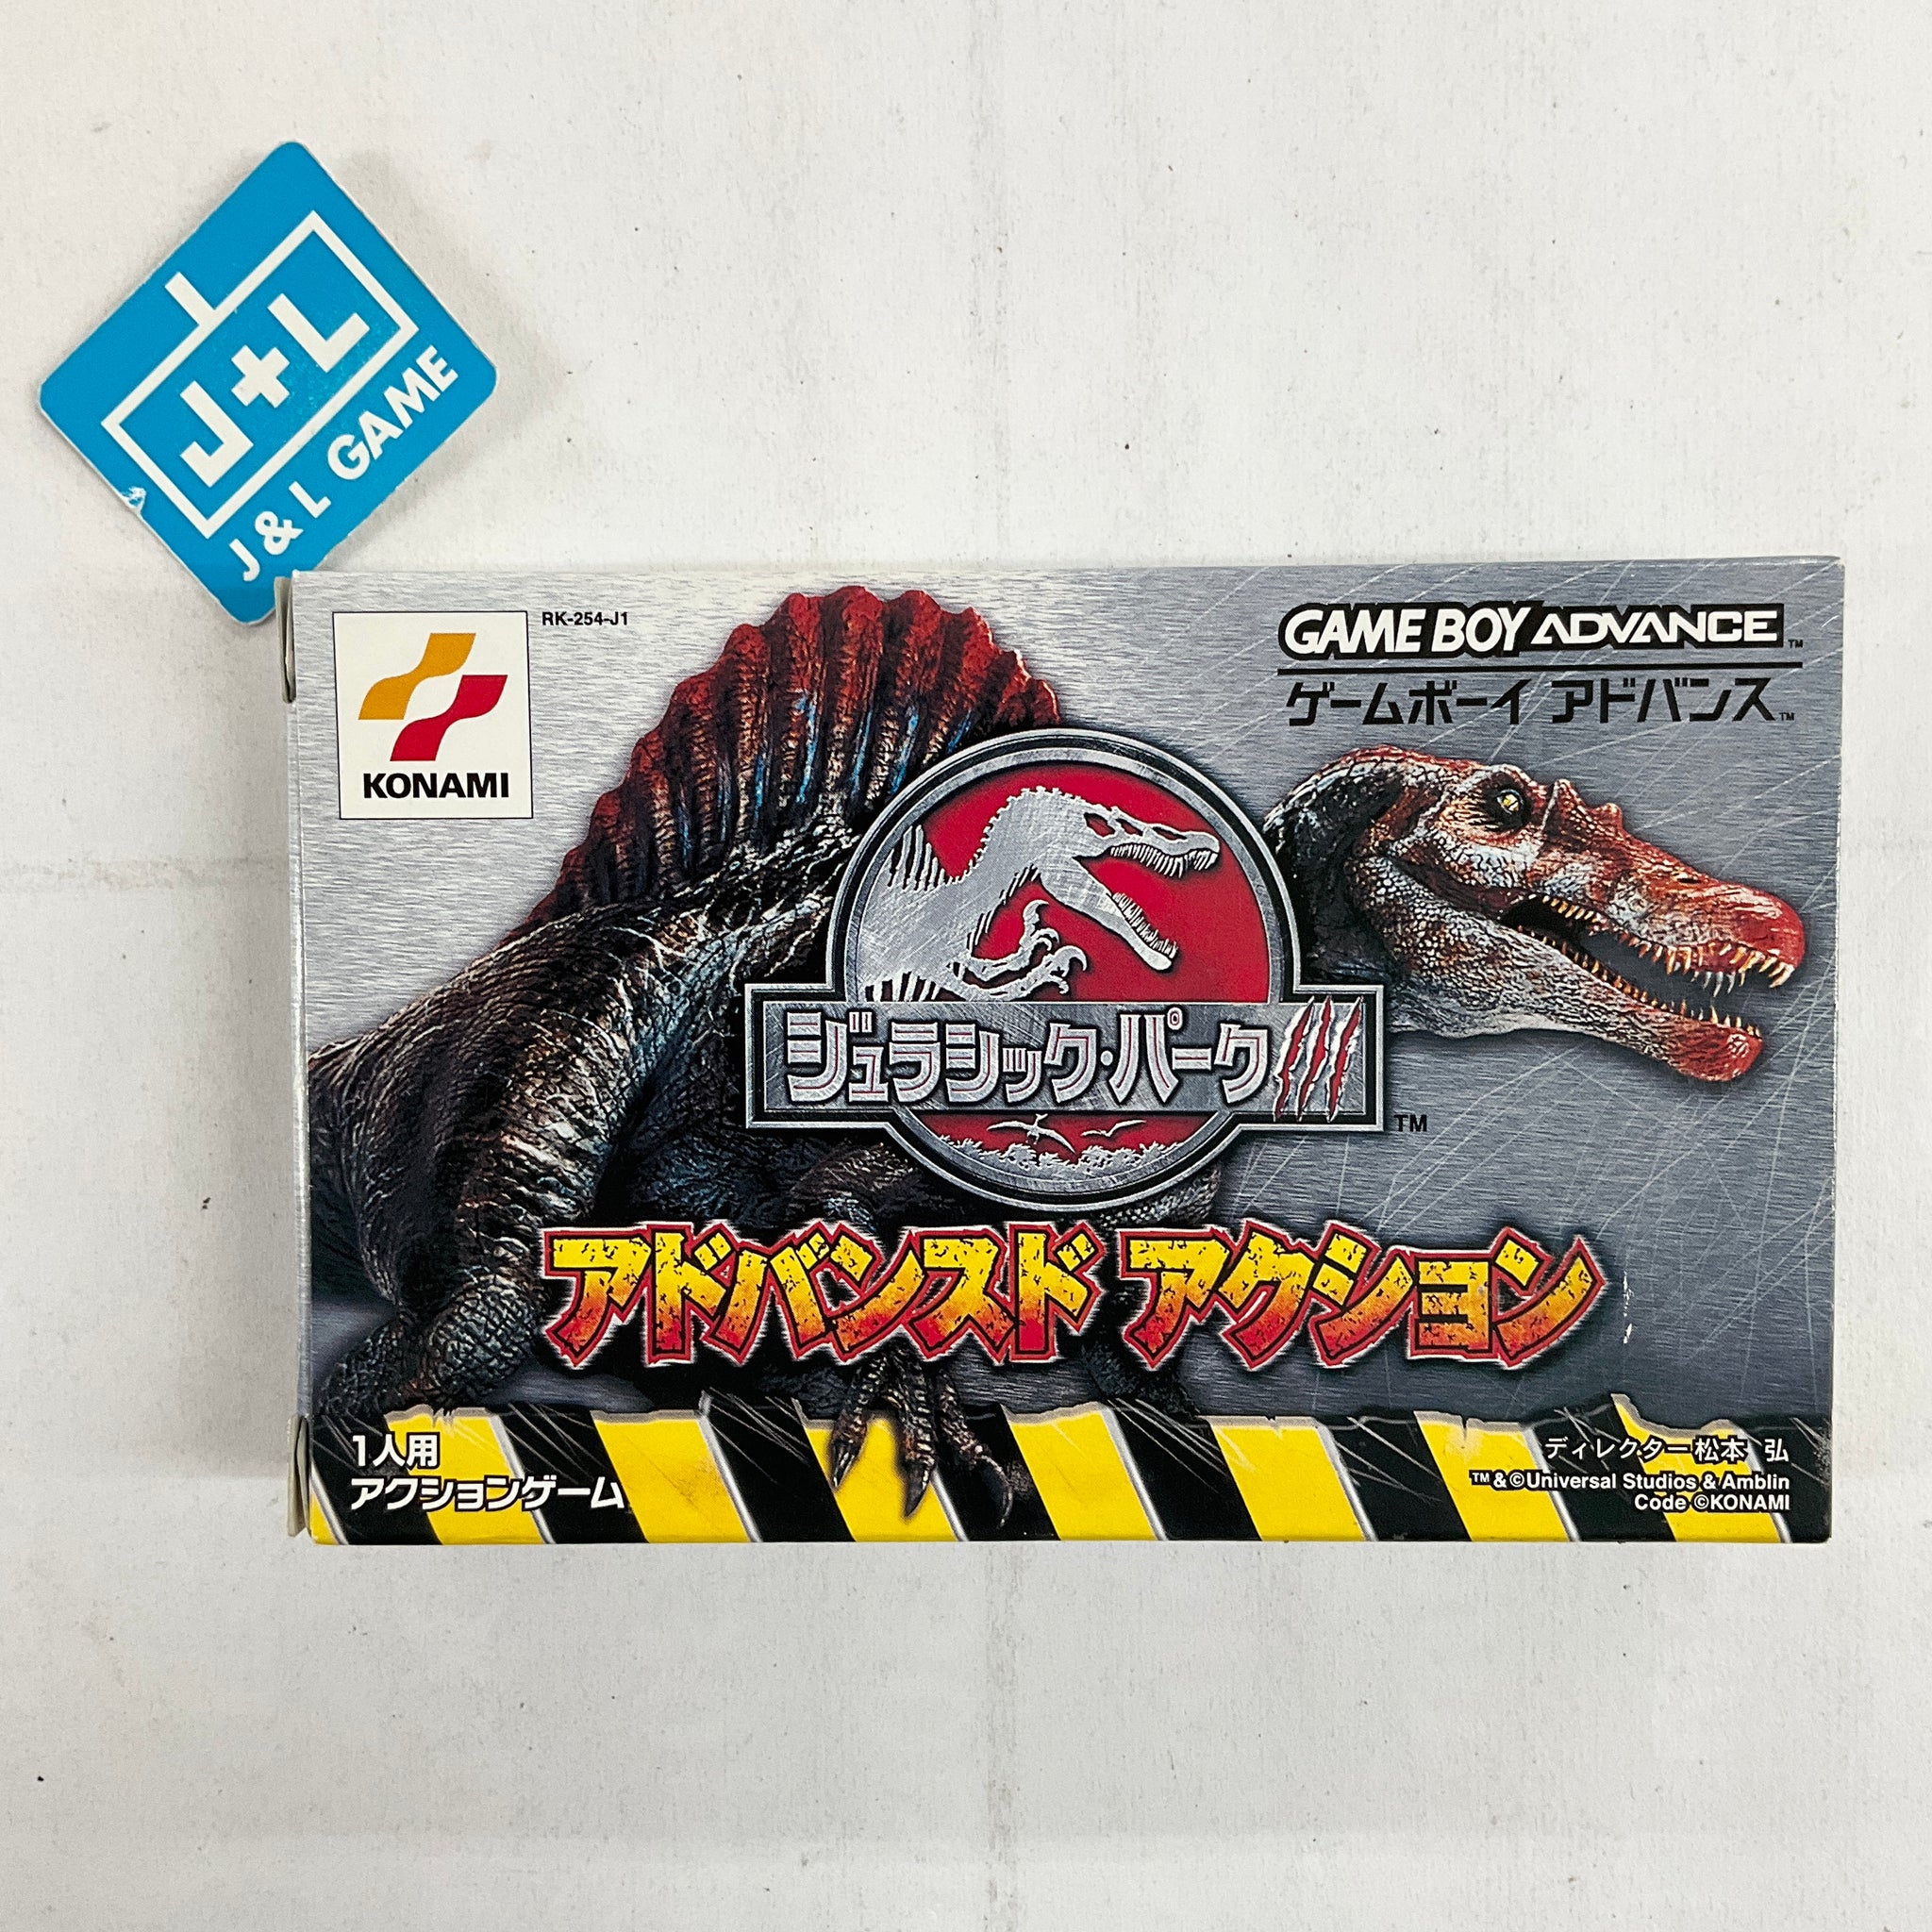 Jurassic Park III: Advance Action - Game Boy Advance (Japanese Import) [Pre-Owned] Video Games Konami   